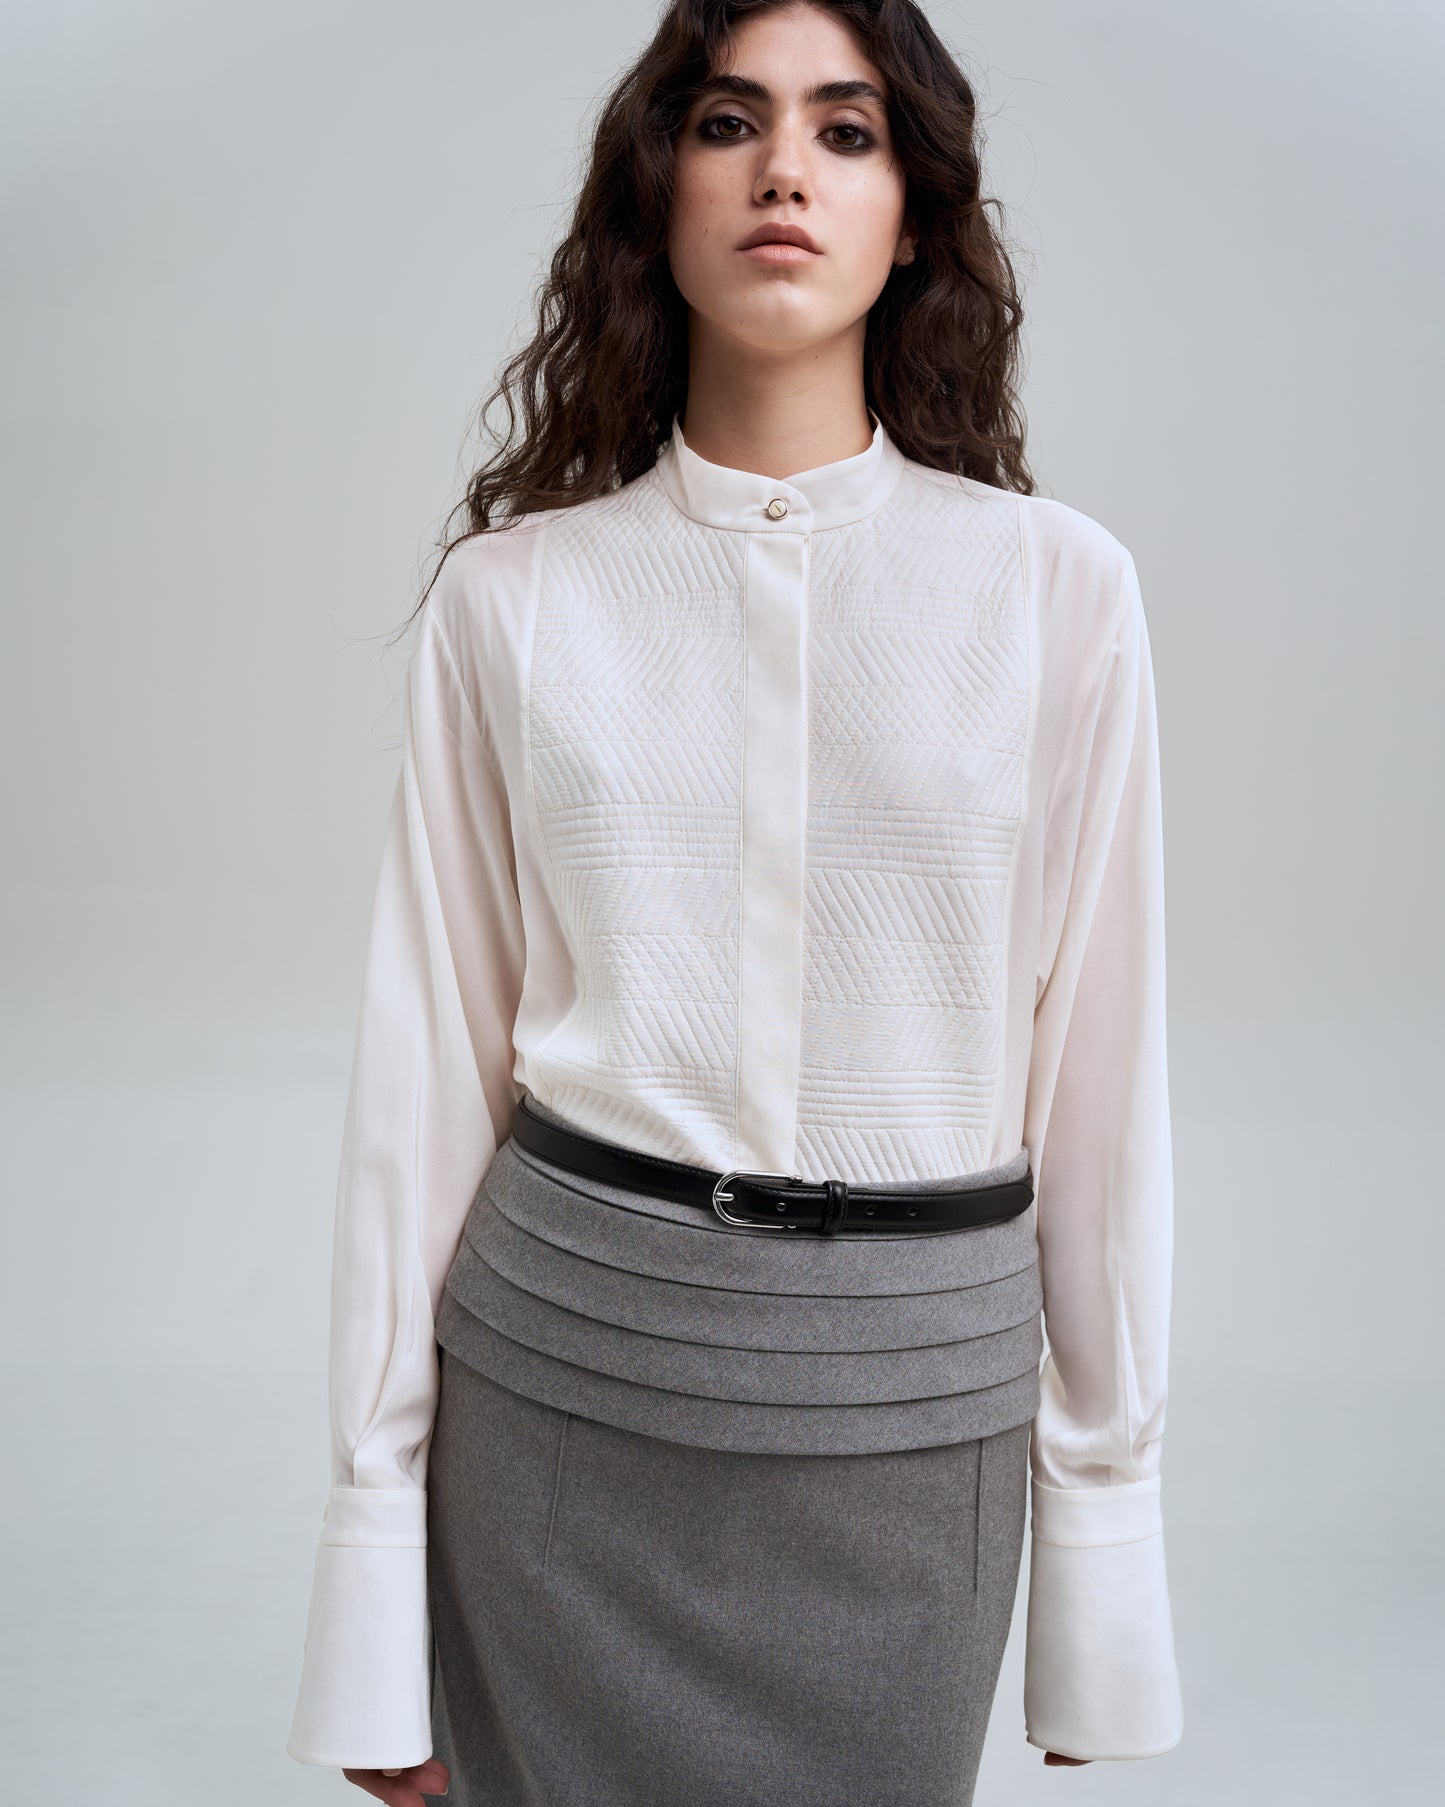 Skirt with pleats